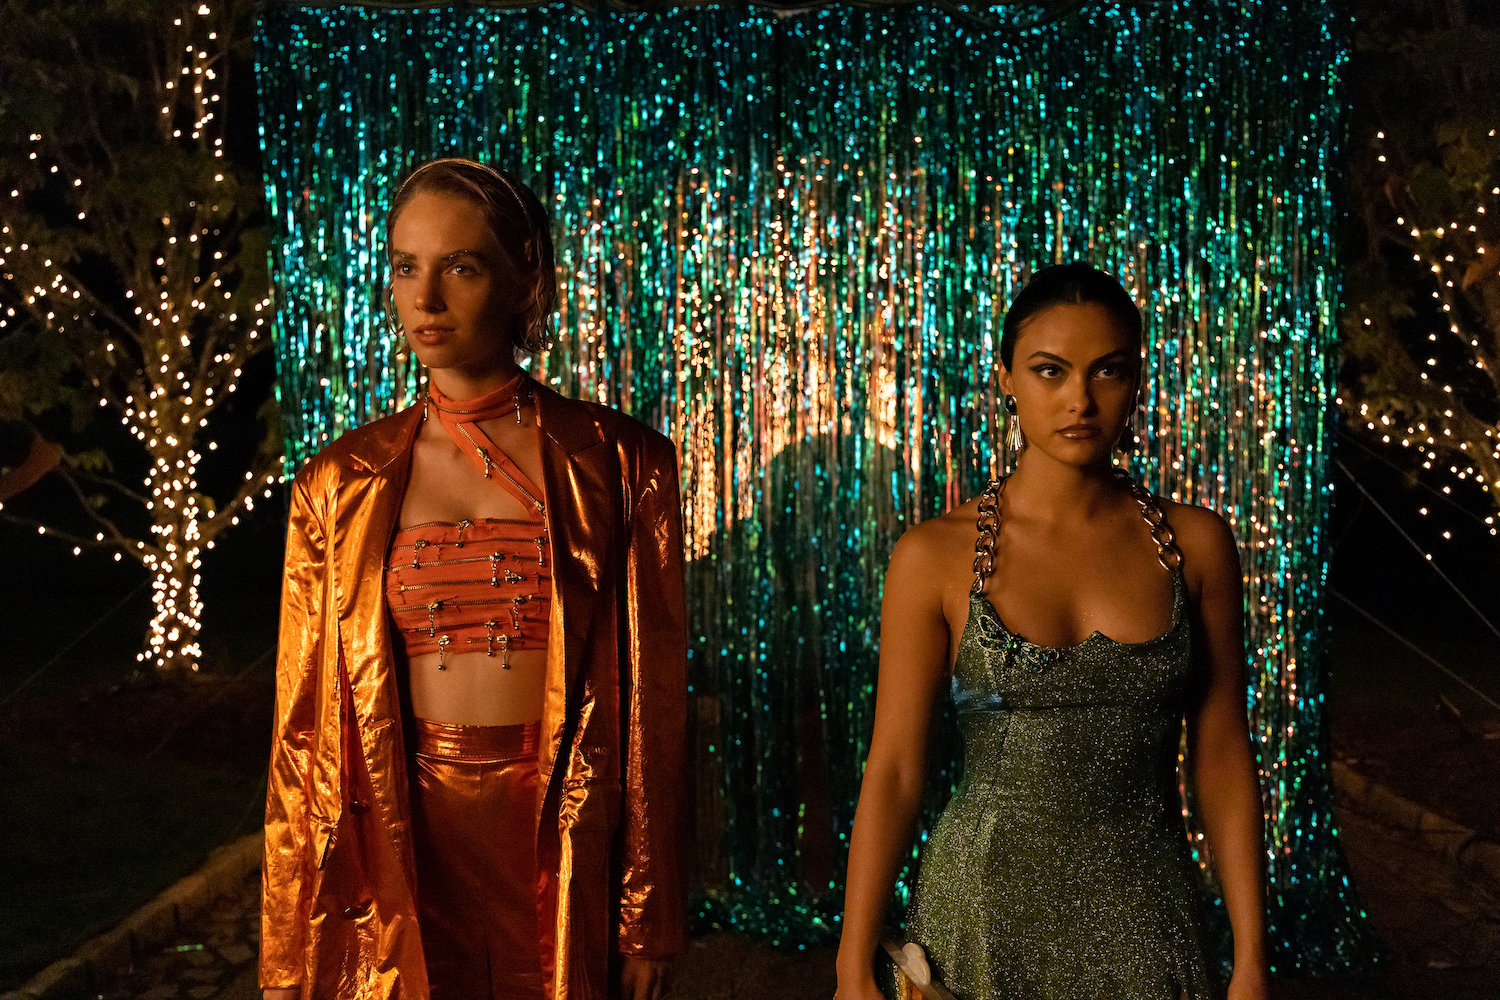 'Do Revenge' comes to Netflix in September. Maya Hawke and Camila Mendes, seen here, star in the film.